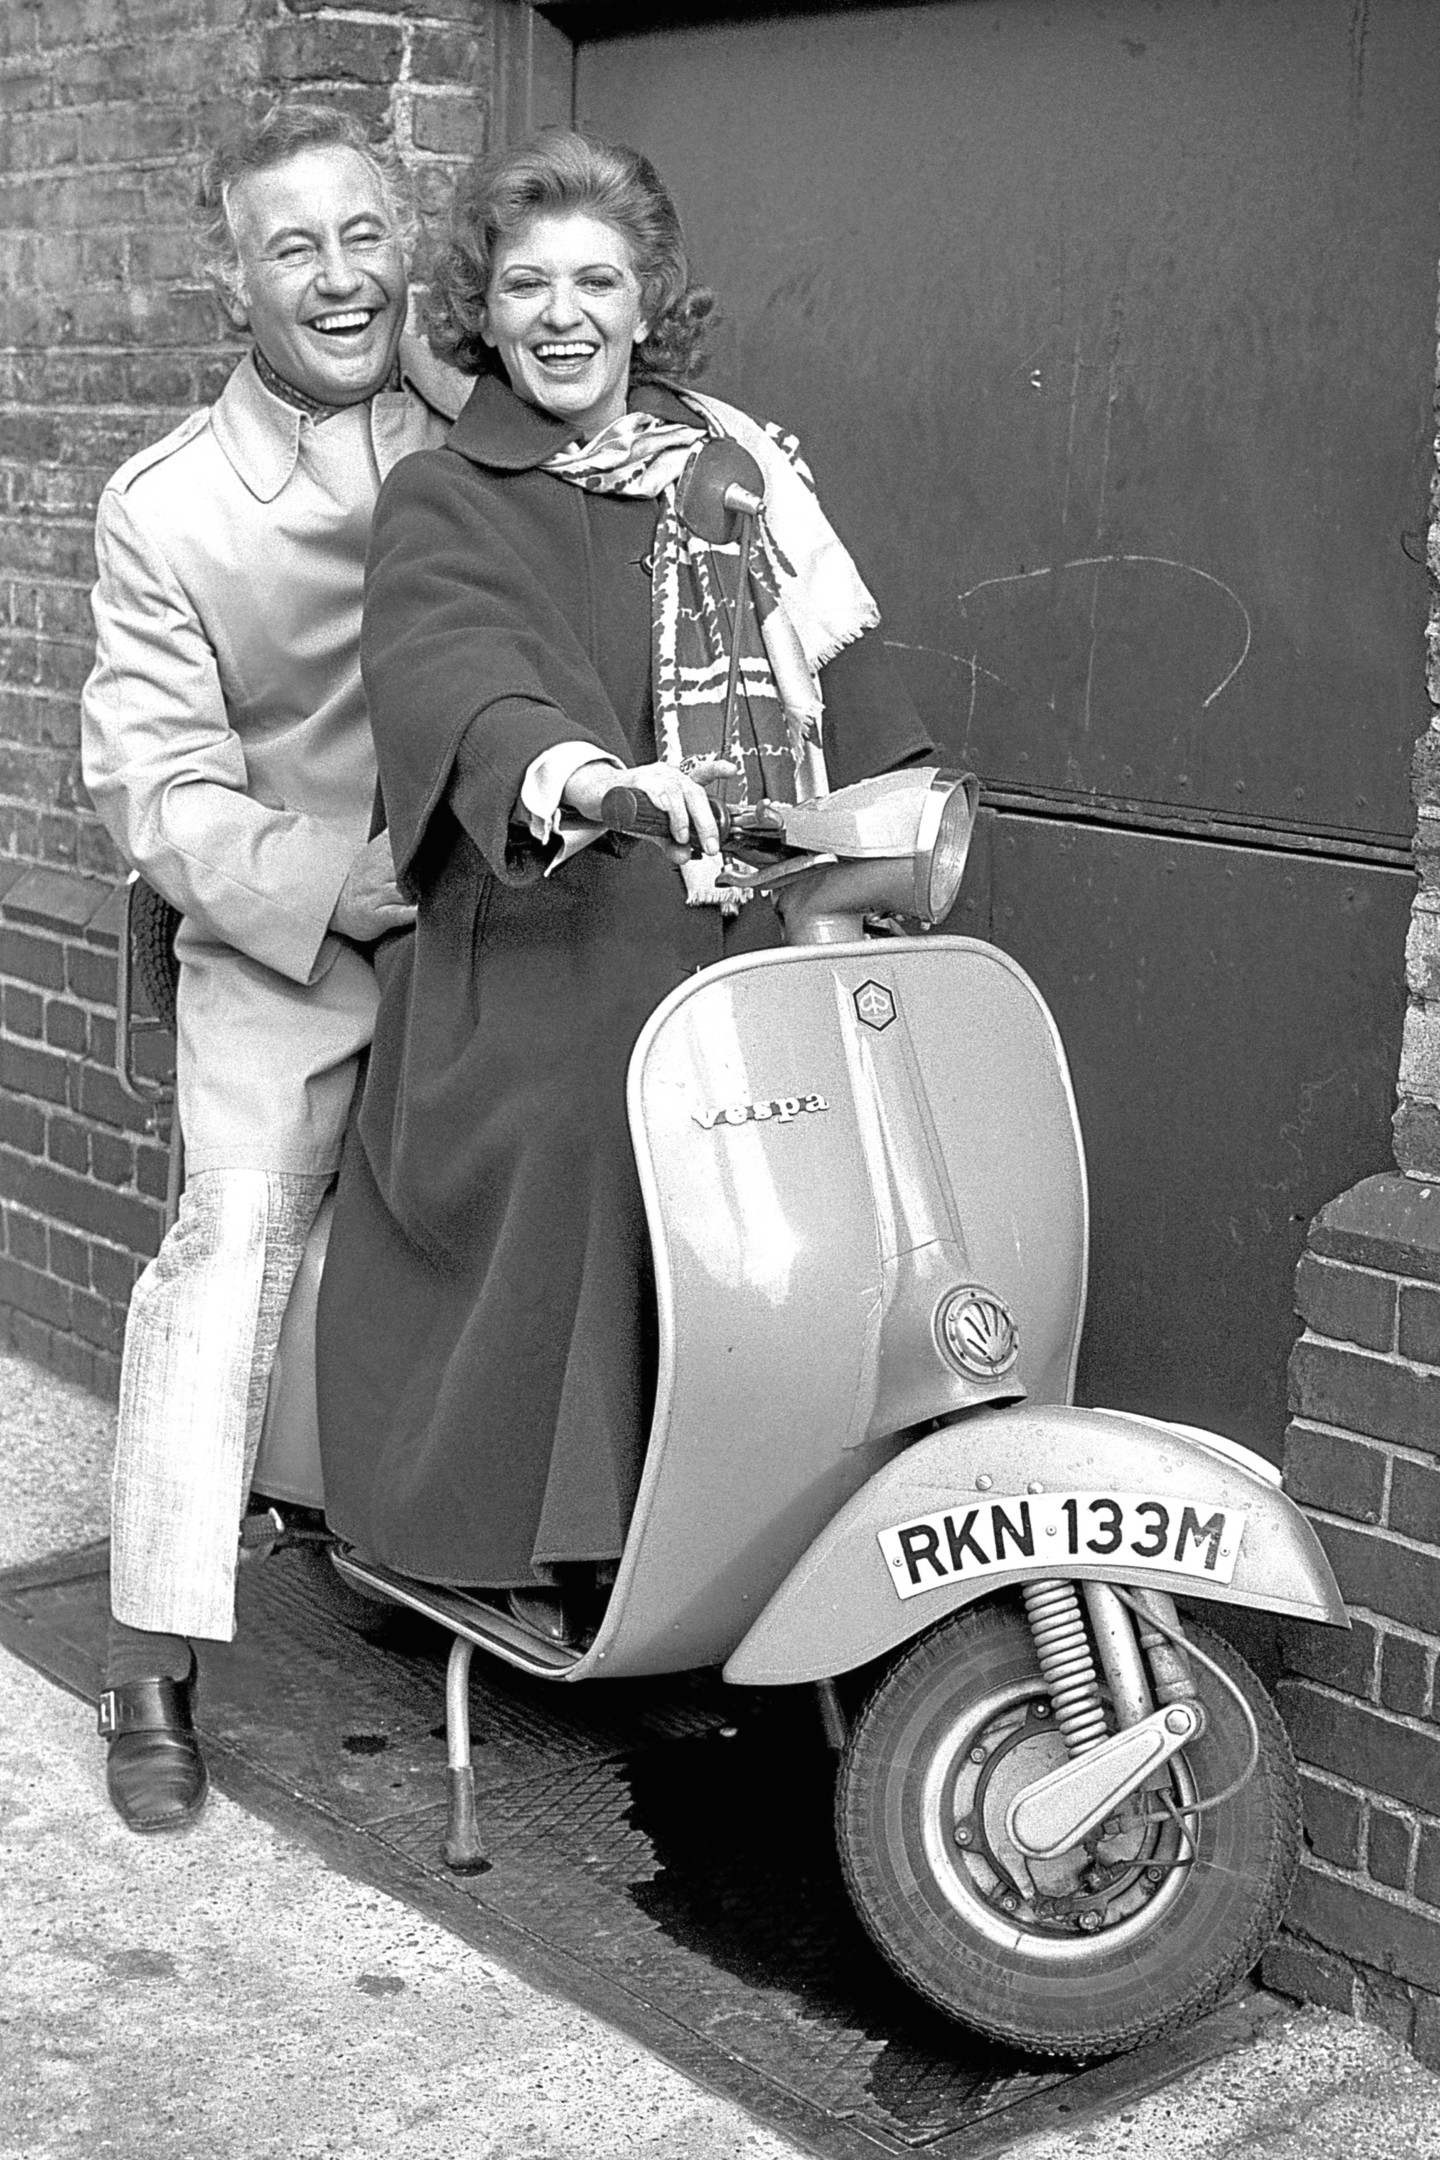 Former player's in Coronation Street Pat Phoenix and Alan Browning astride a motor scooter outside London's Greenwood Theatre 